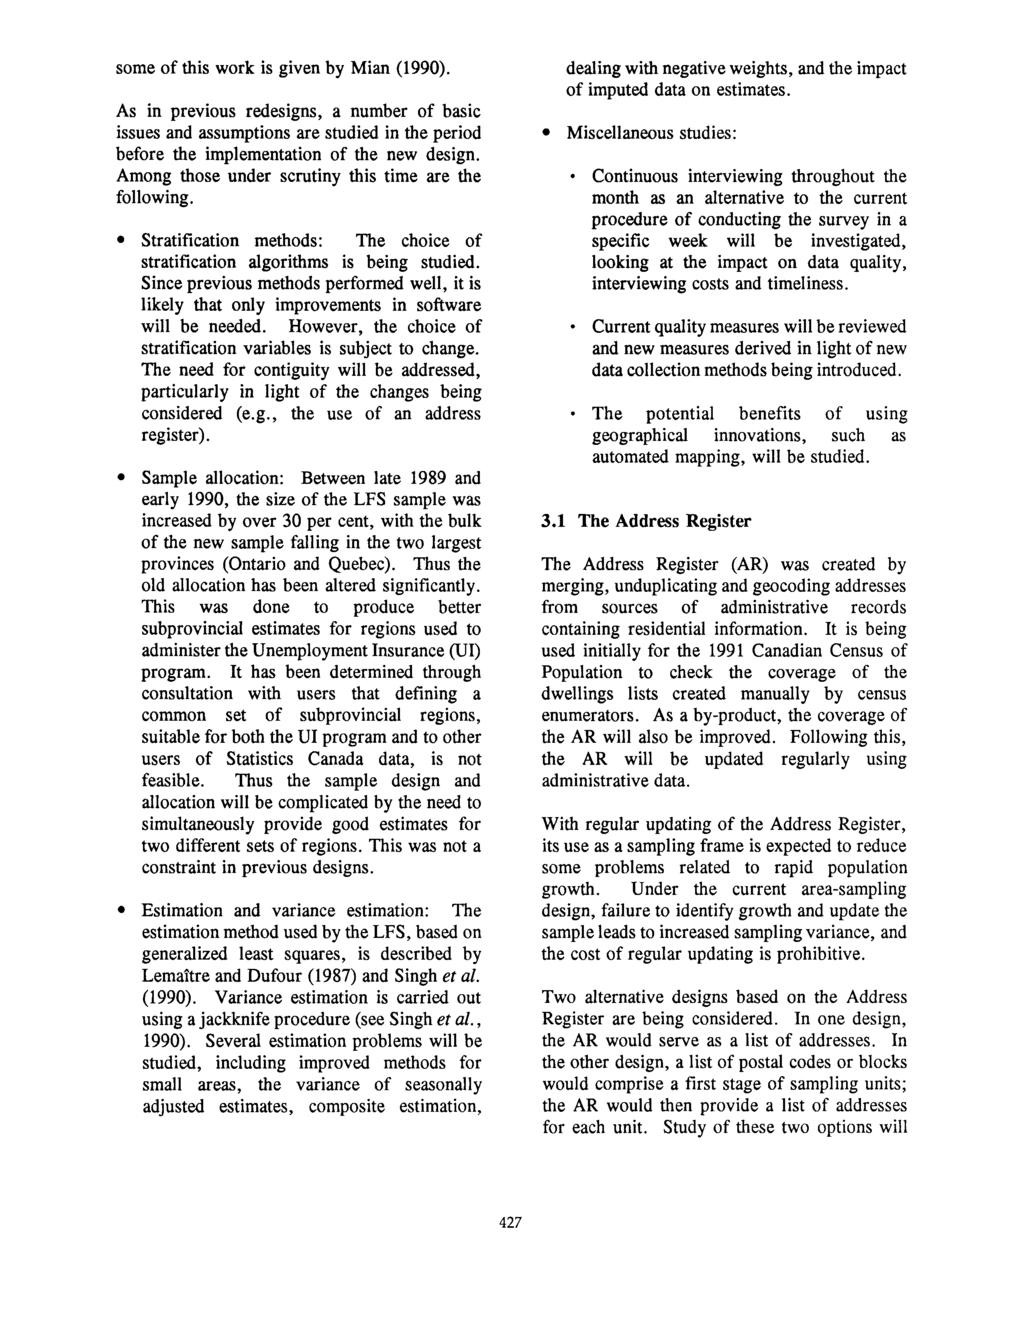 some of this work is given by Mian (1990). As in previous redesigns, a number of basic issues and assumptions are studied in the period before the implementation of the new design.